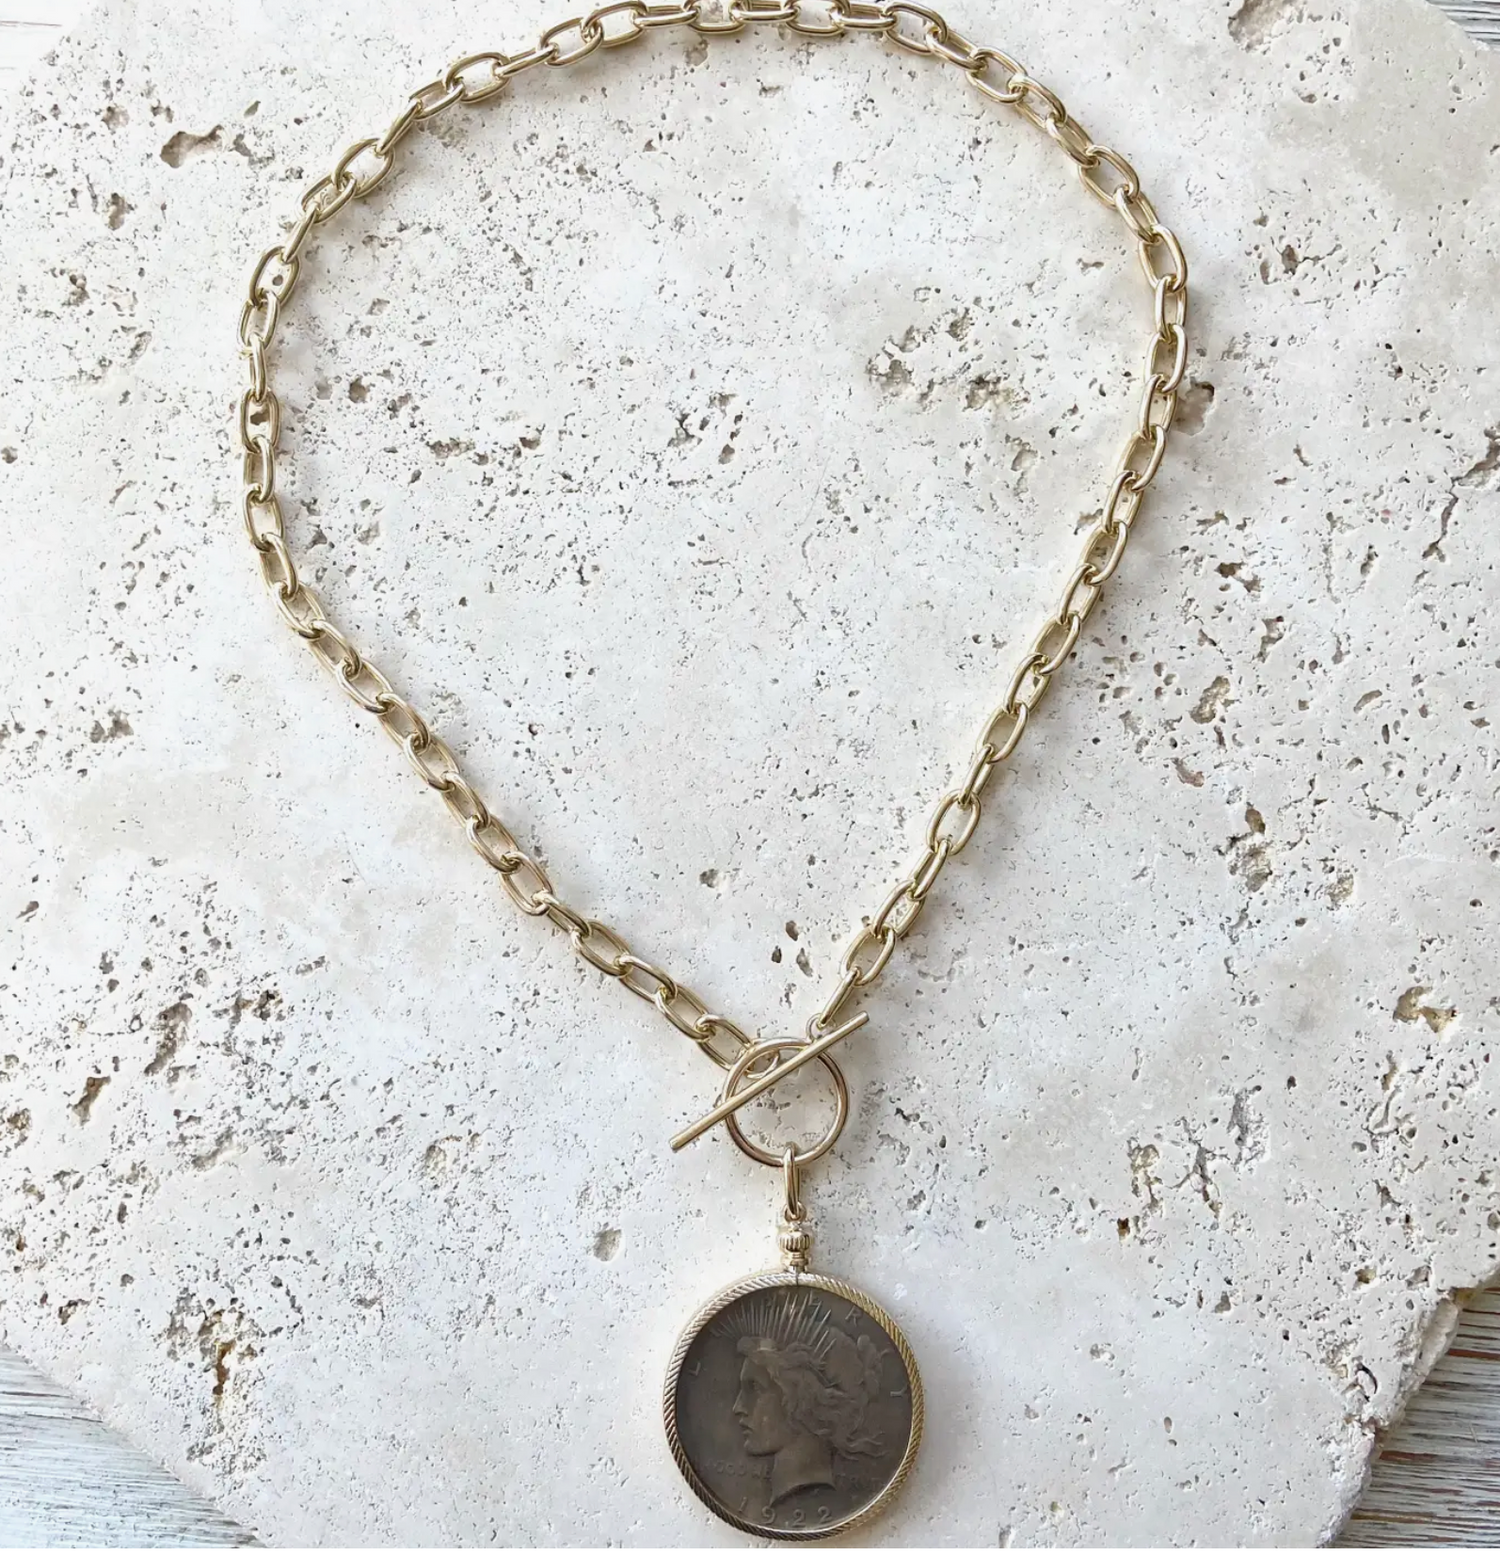 Gold Chain with coin medallion necklace